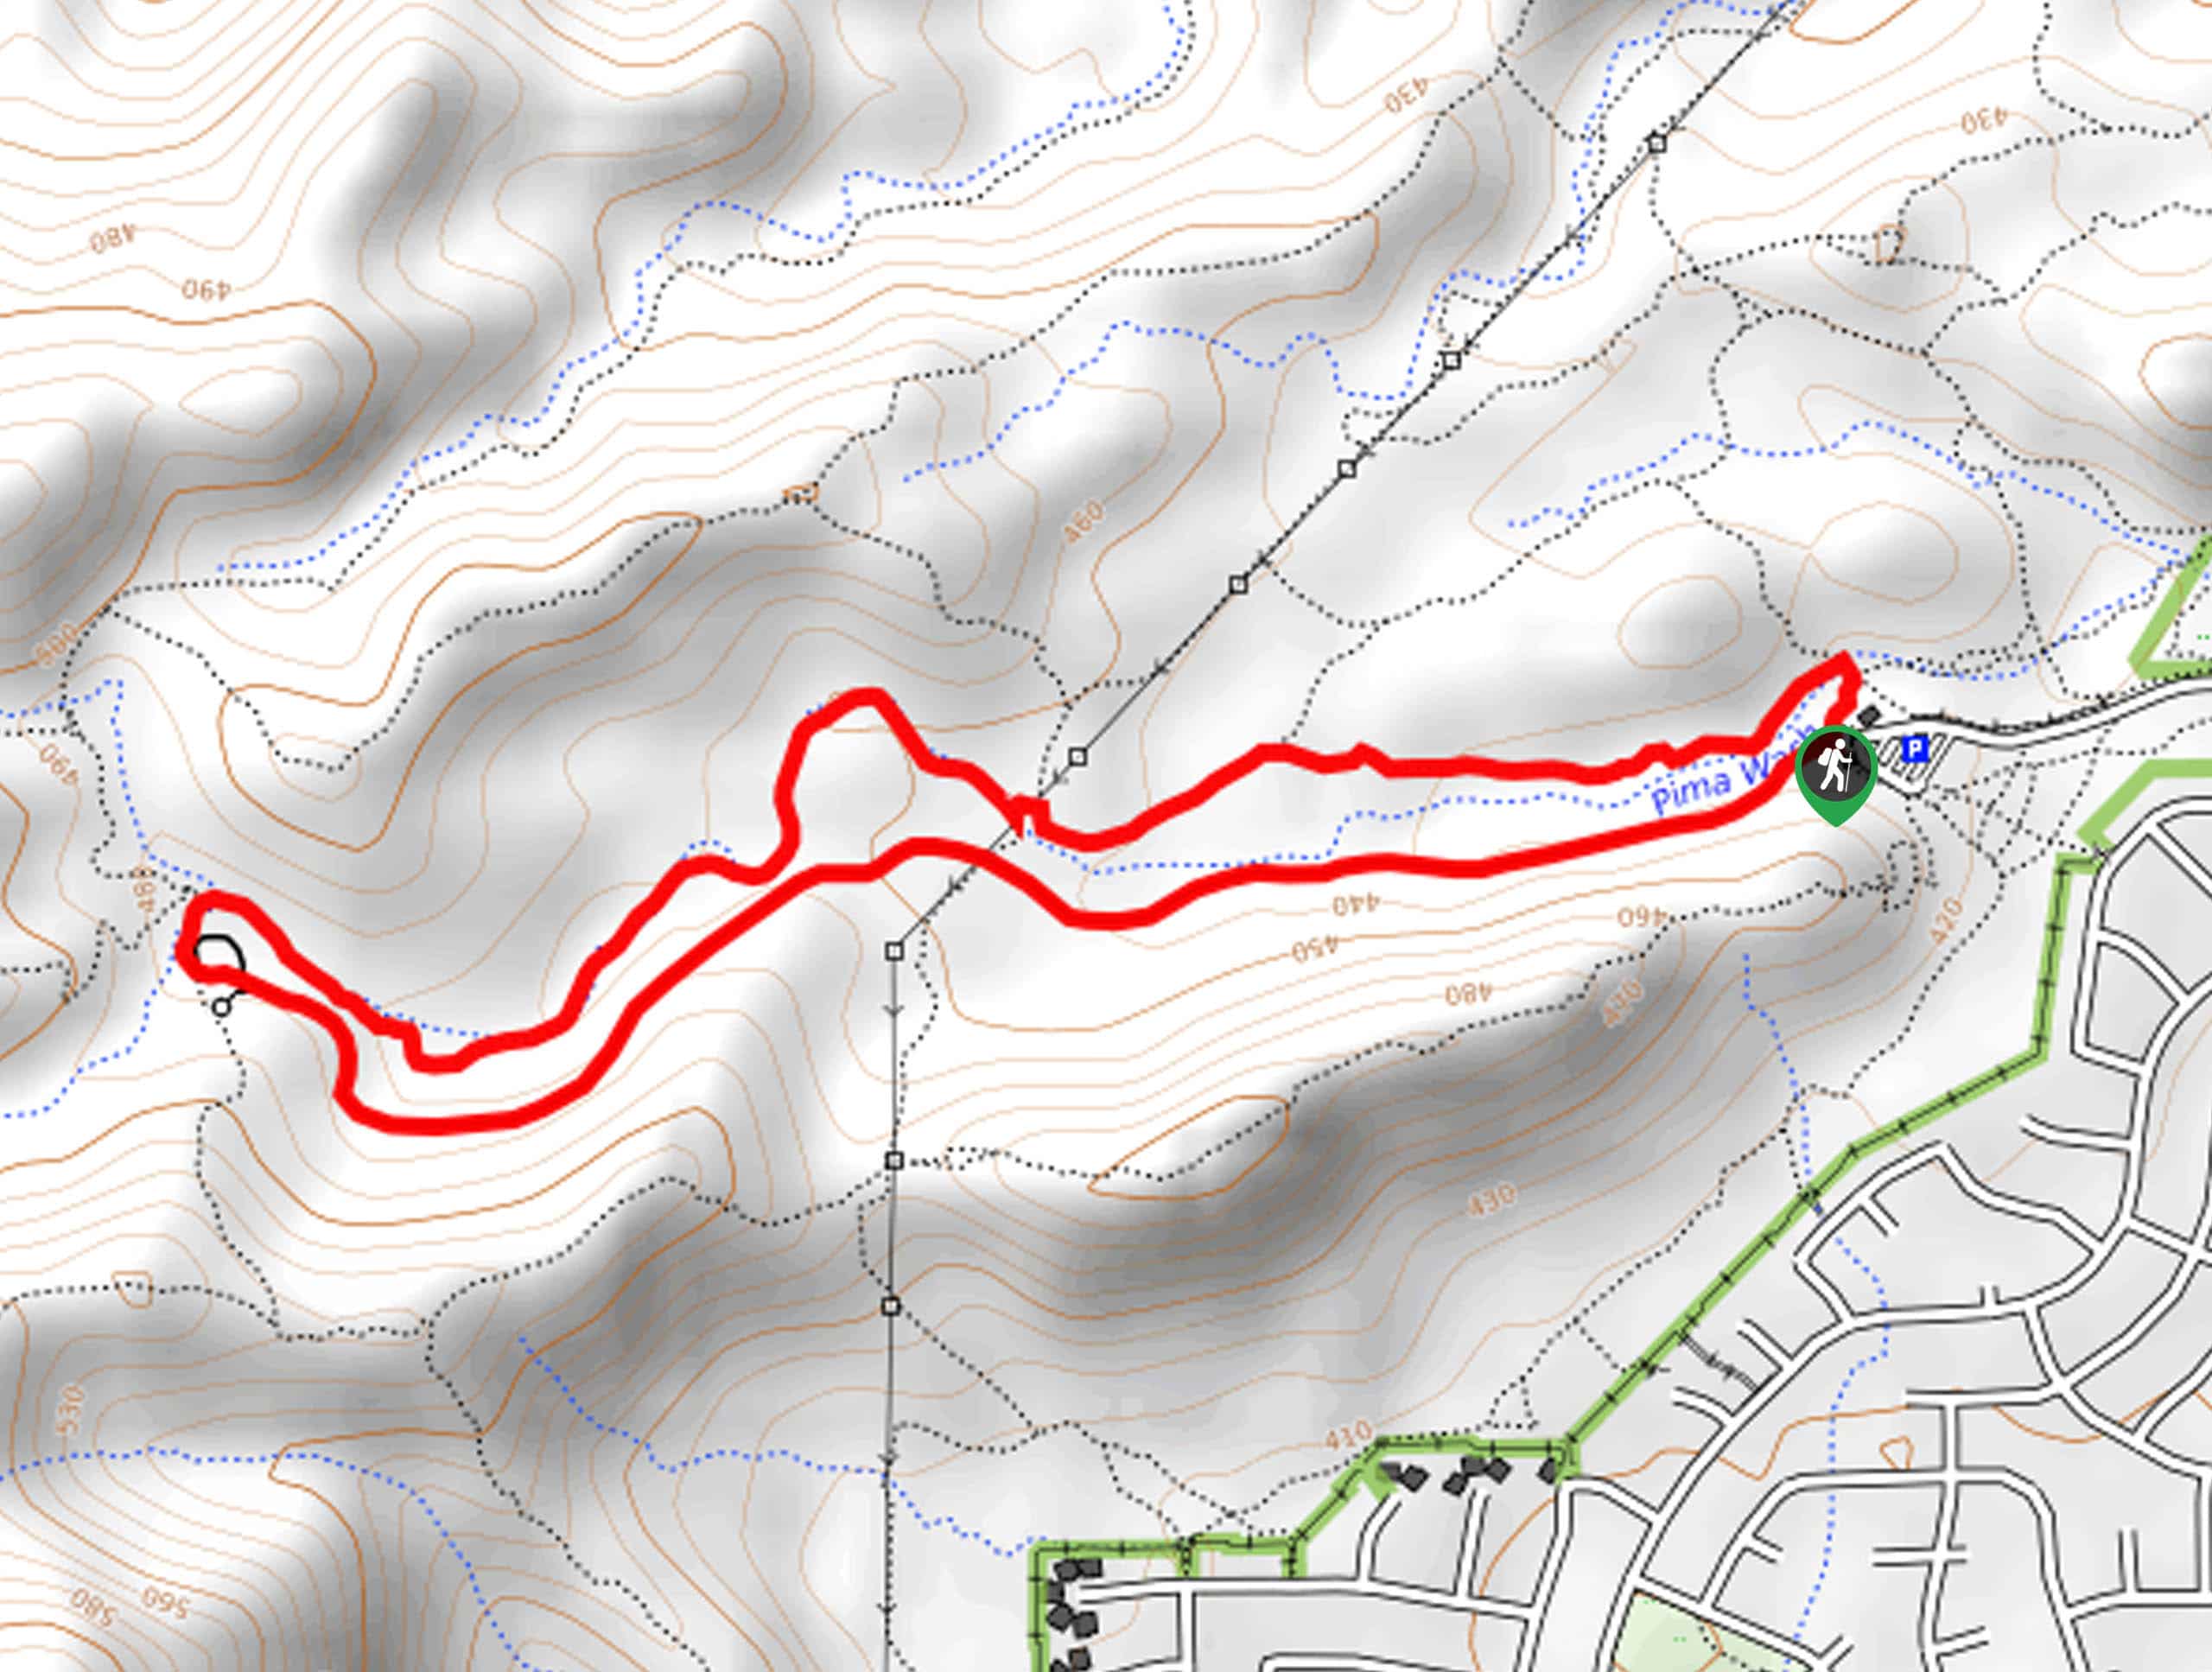 Pima Wash Trail to West Loop Map